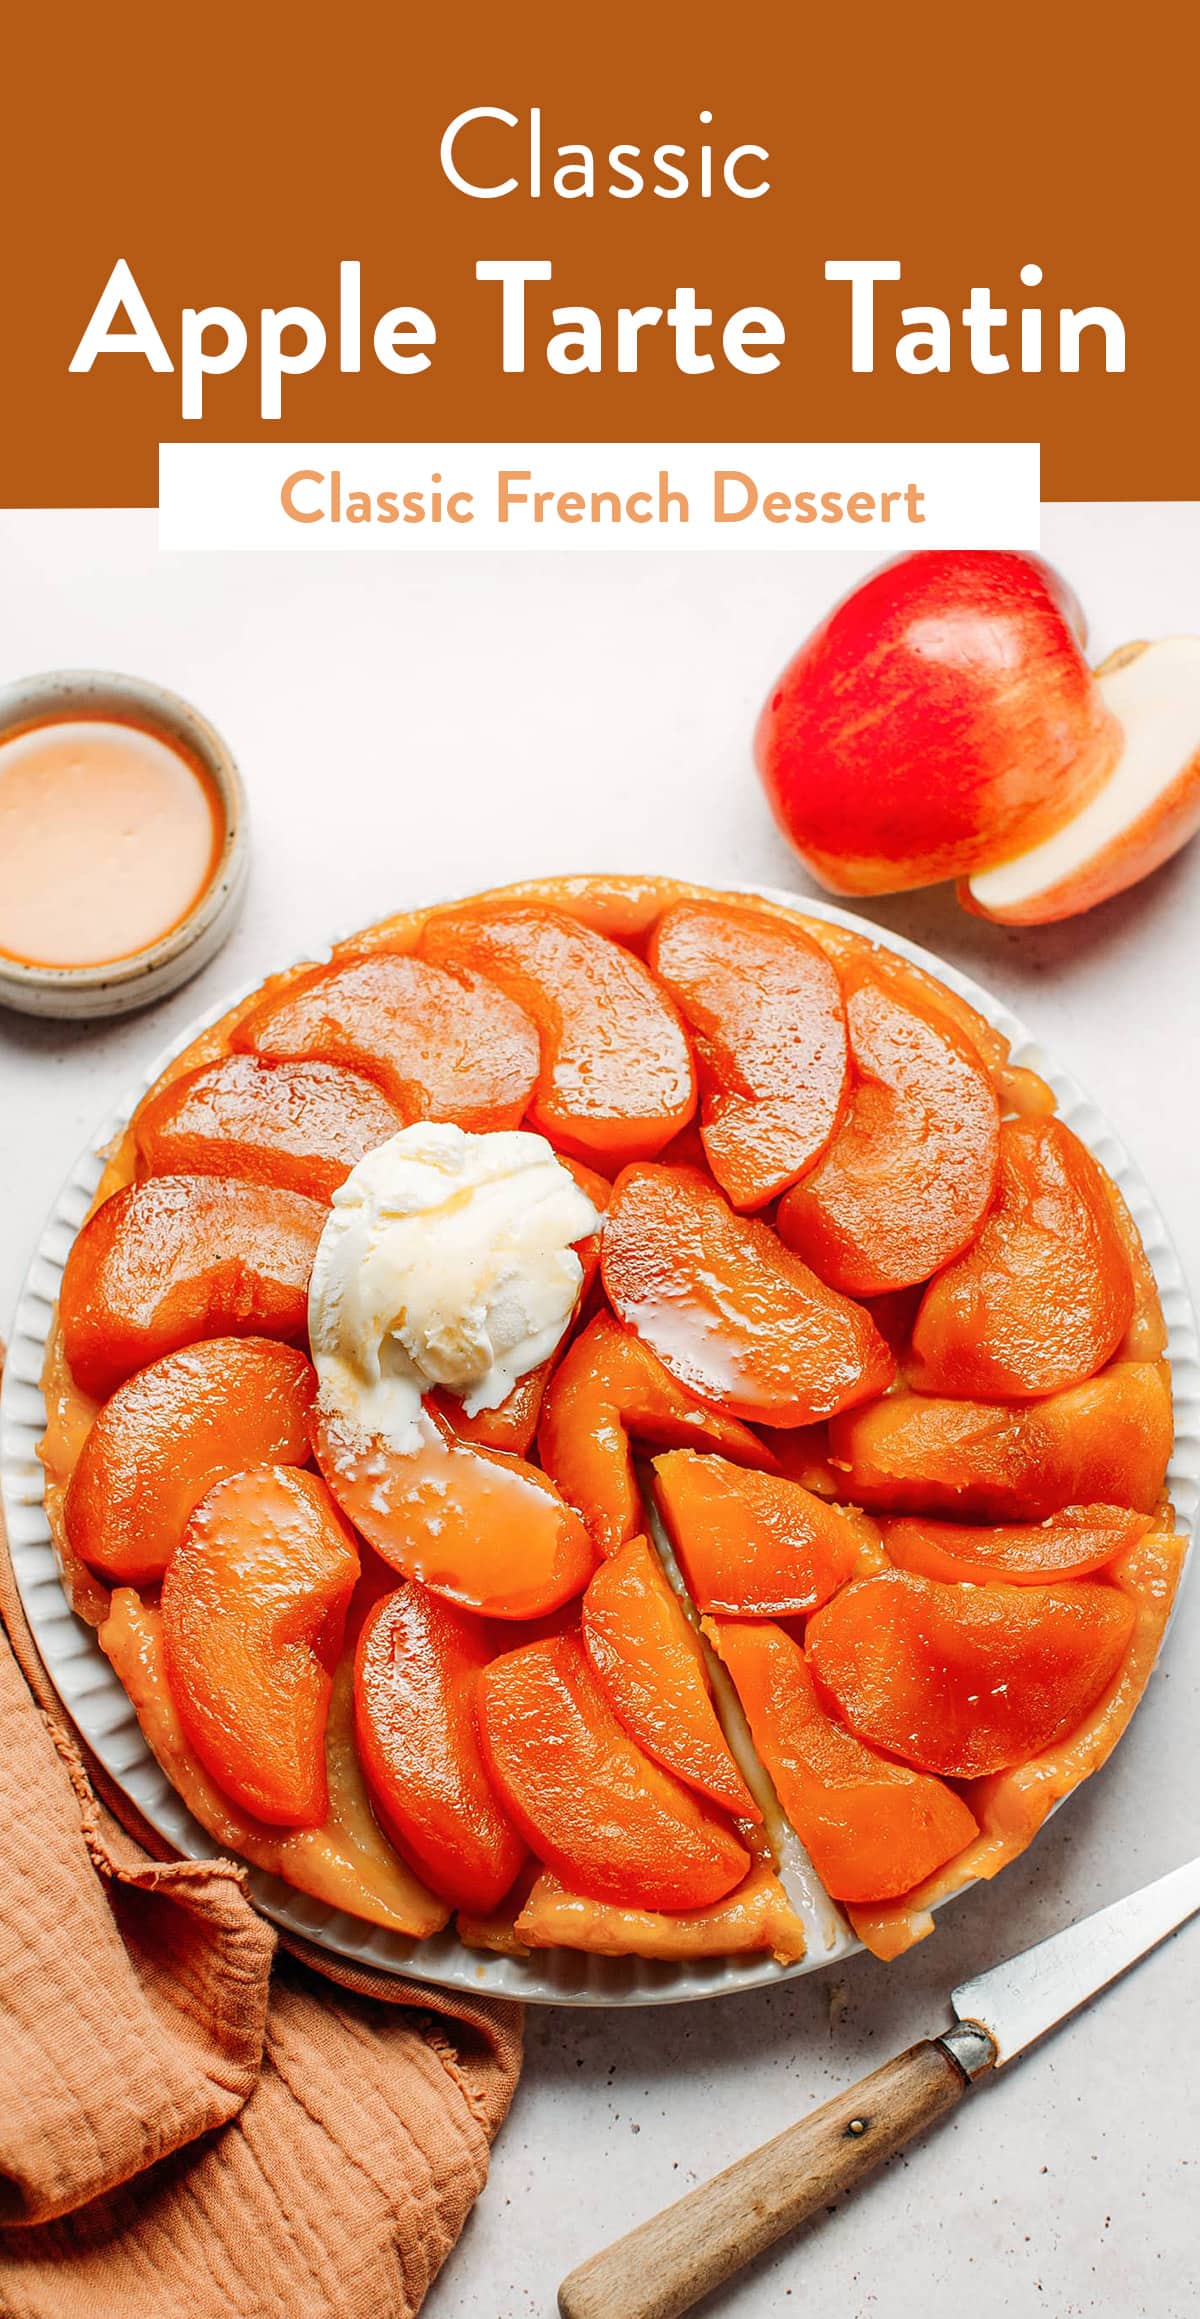 This classic French dessert features juicy caramelized apples topped with a crispy and buttery shortcrust pastry. This Tarte Tatin recipe is easy to make and SO delicious served warm with a scoop of vanilla ice cream!